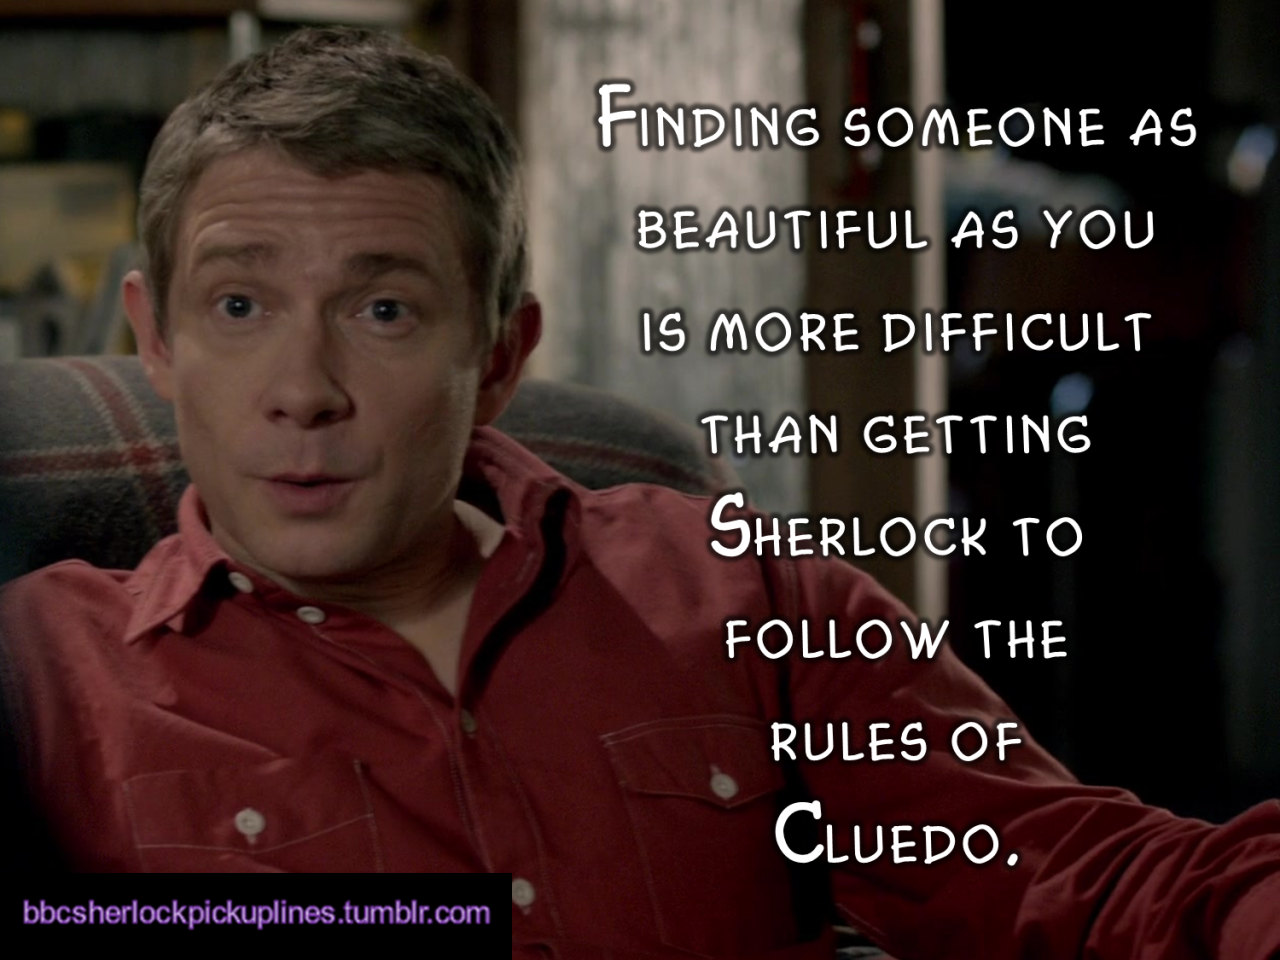 â€œFinding someone as beautiful as you is more difficult than getting Sherlock